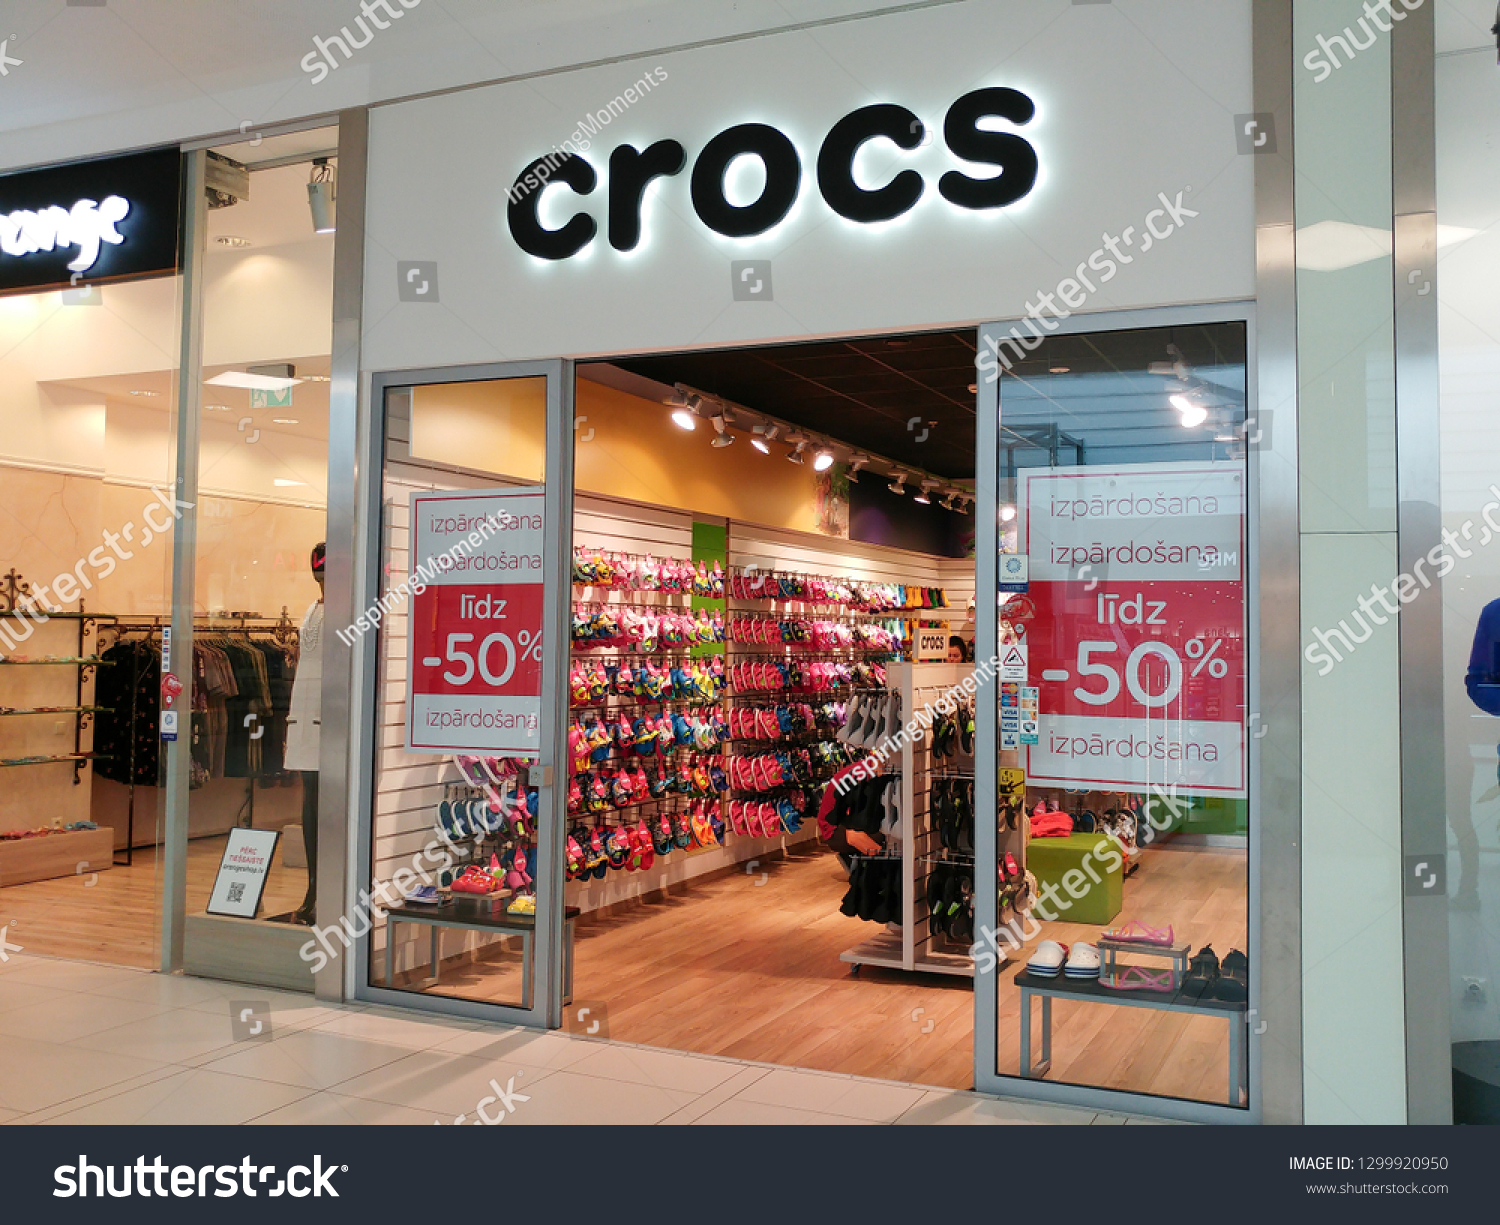 shoe stores that sell crocs near me